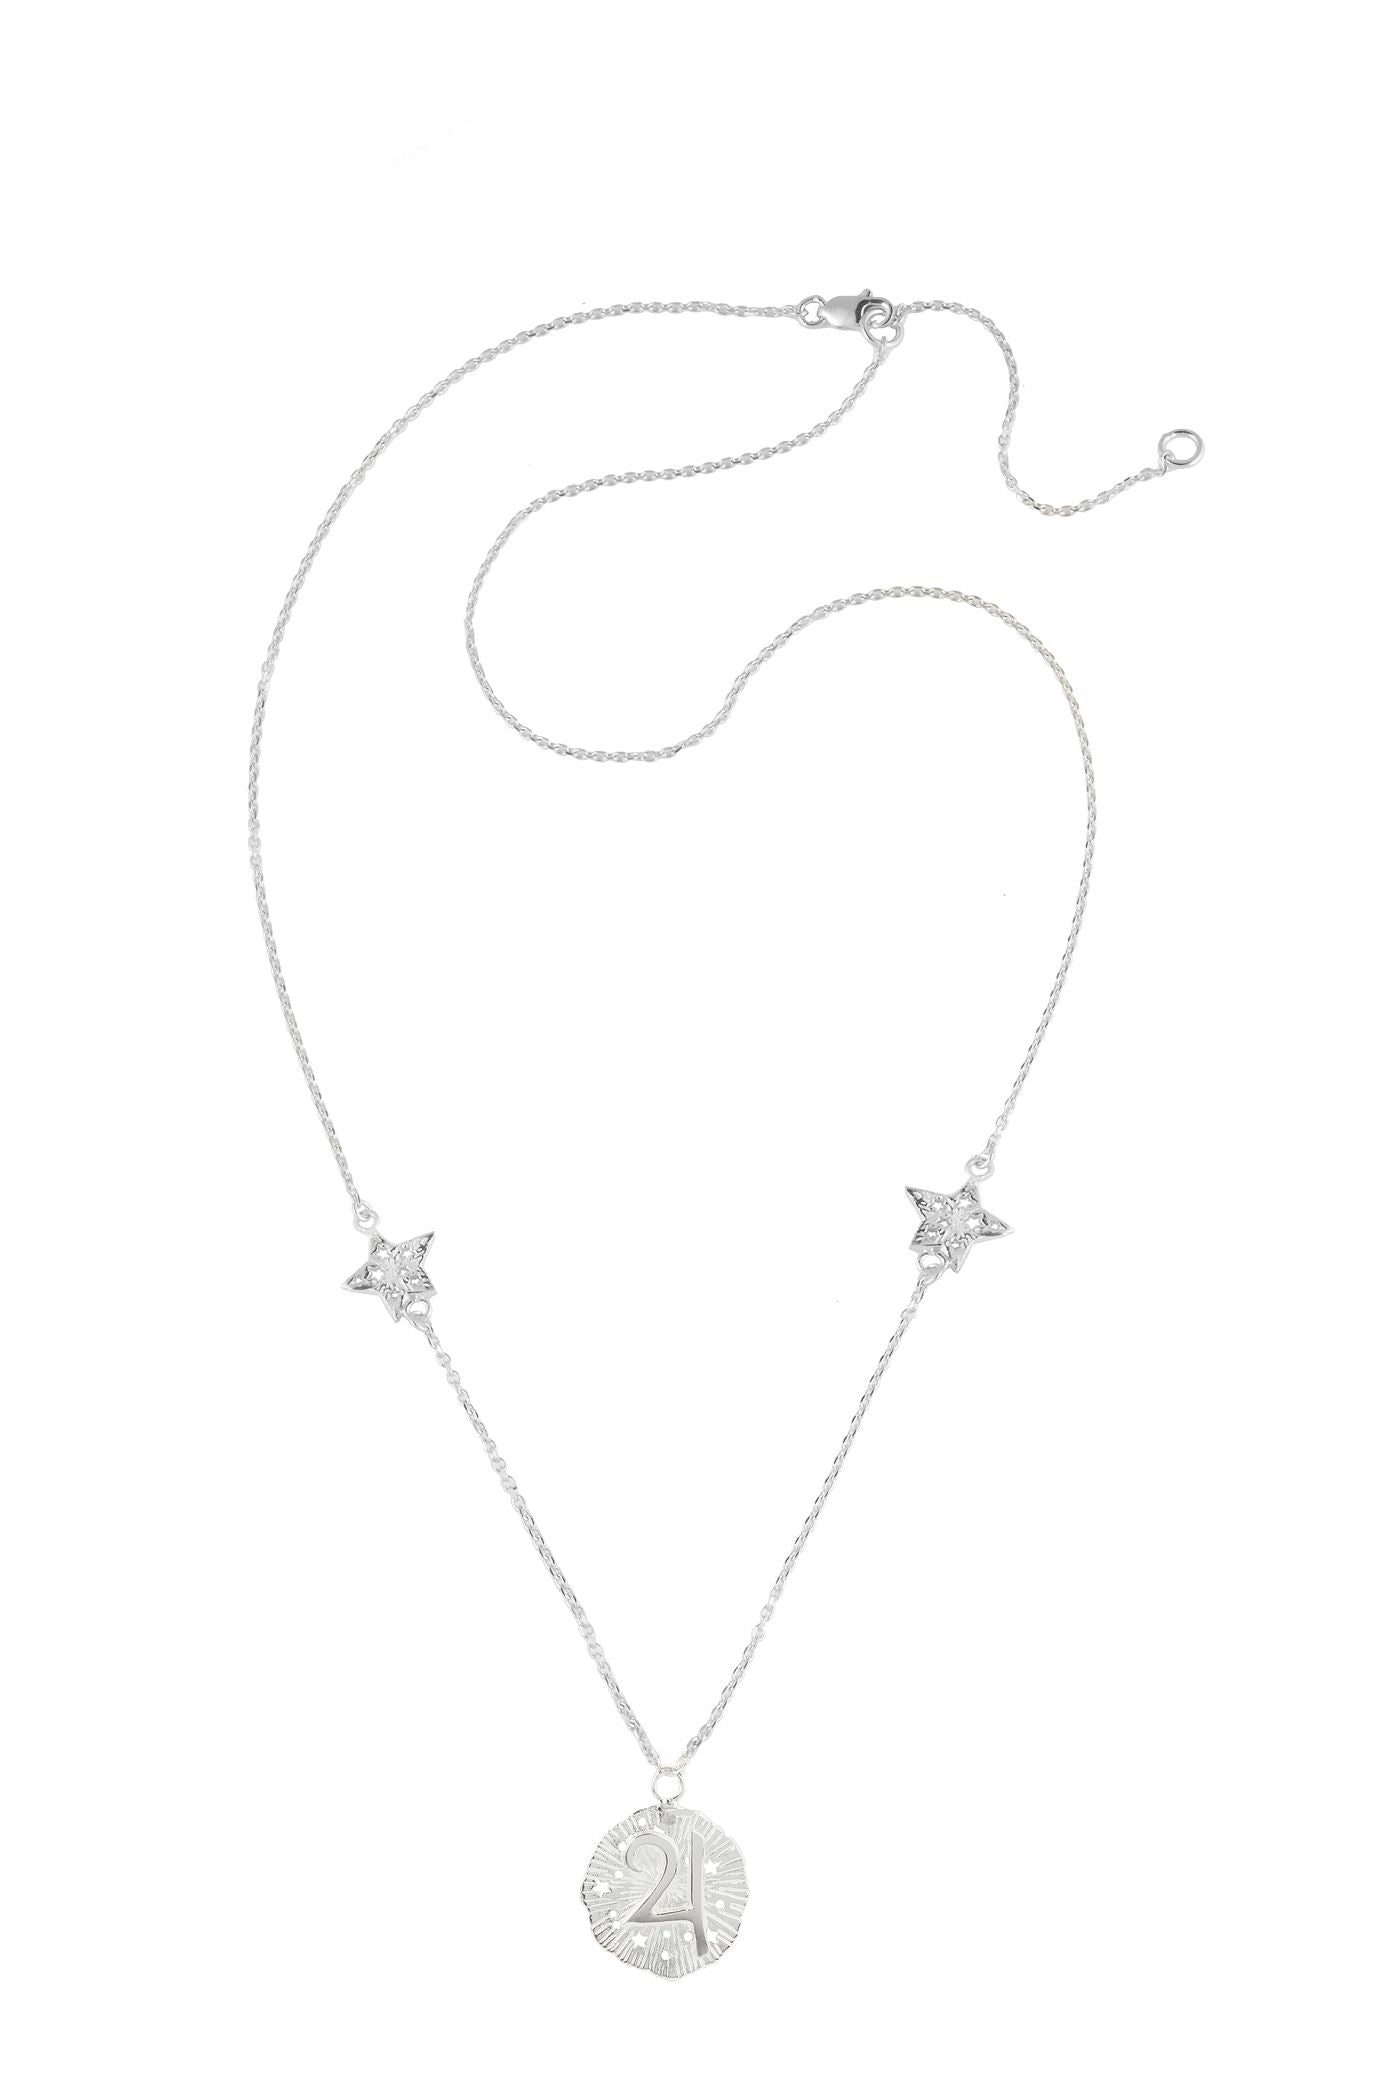 Jupiter with 2 stars on the chain necklace. 46 cm. Silver